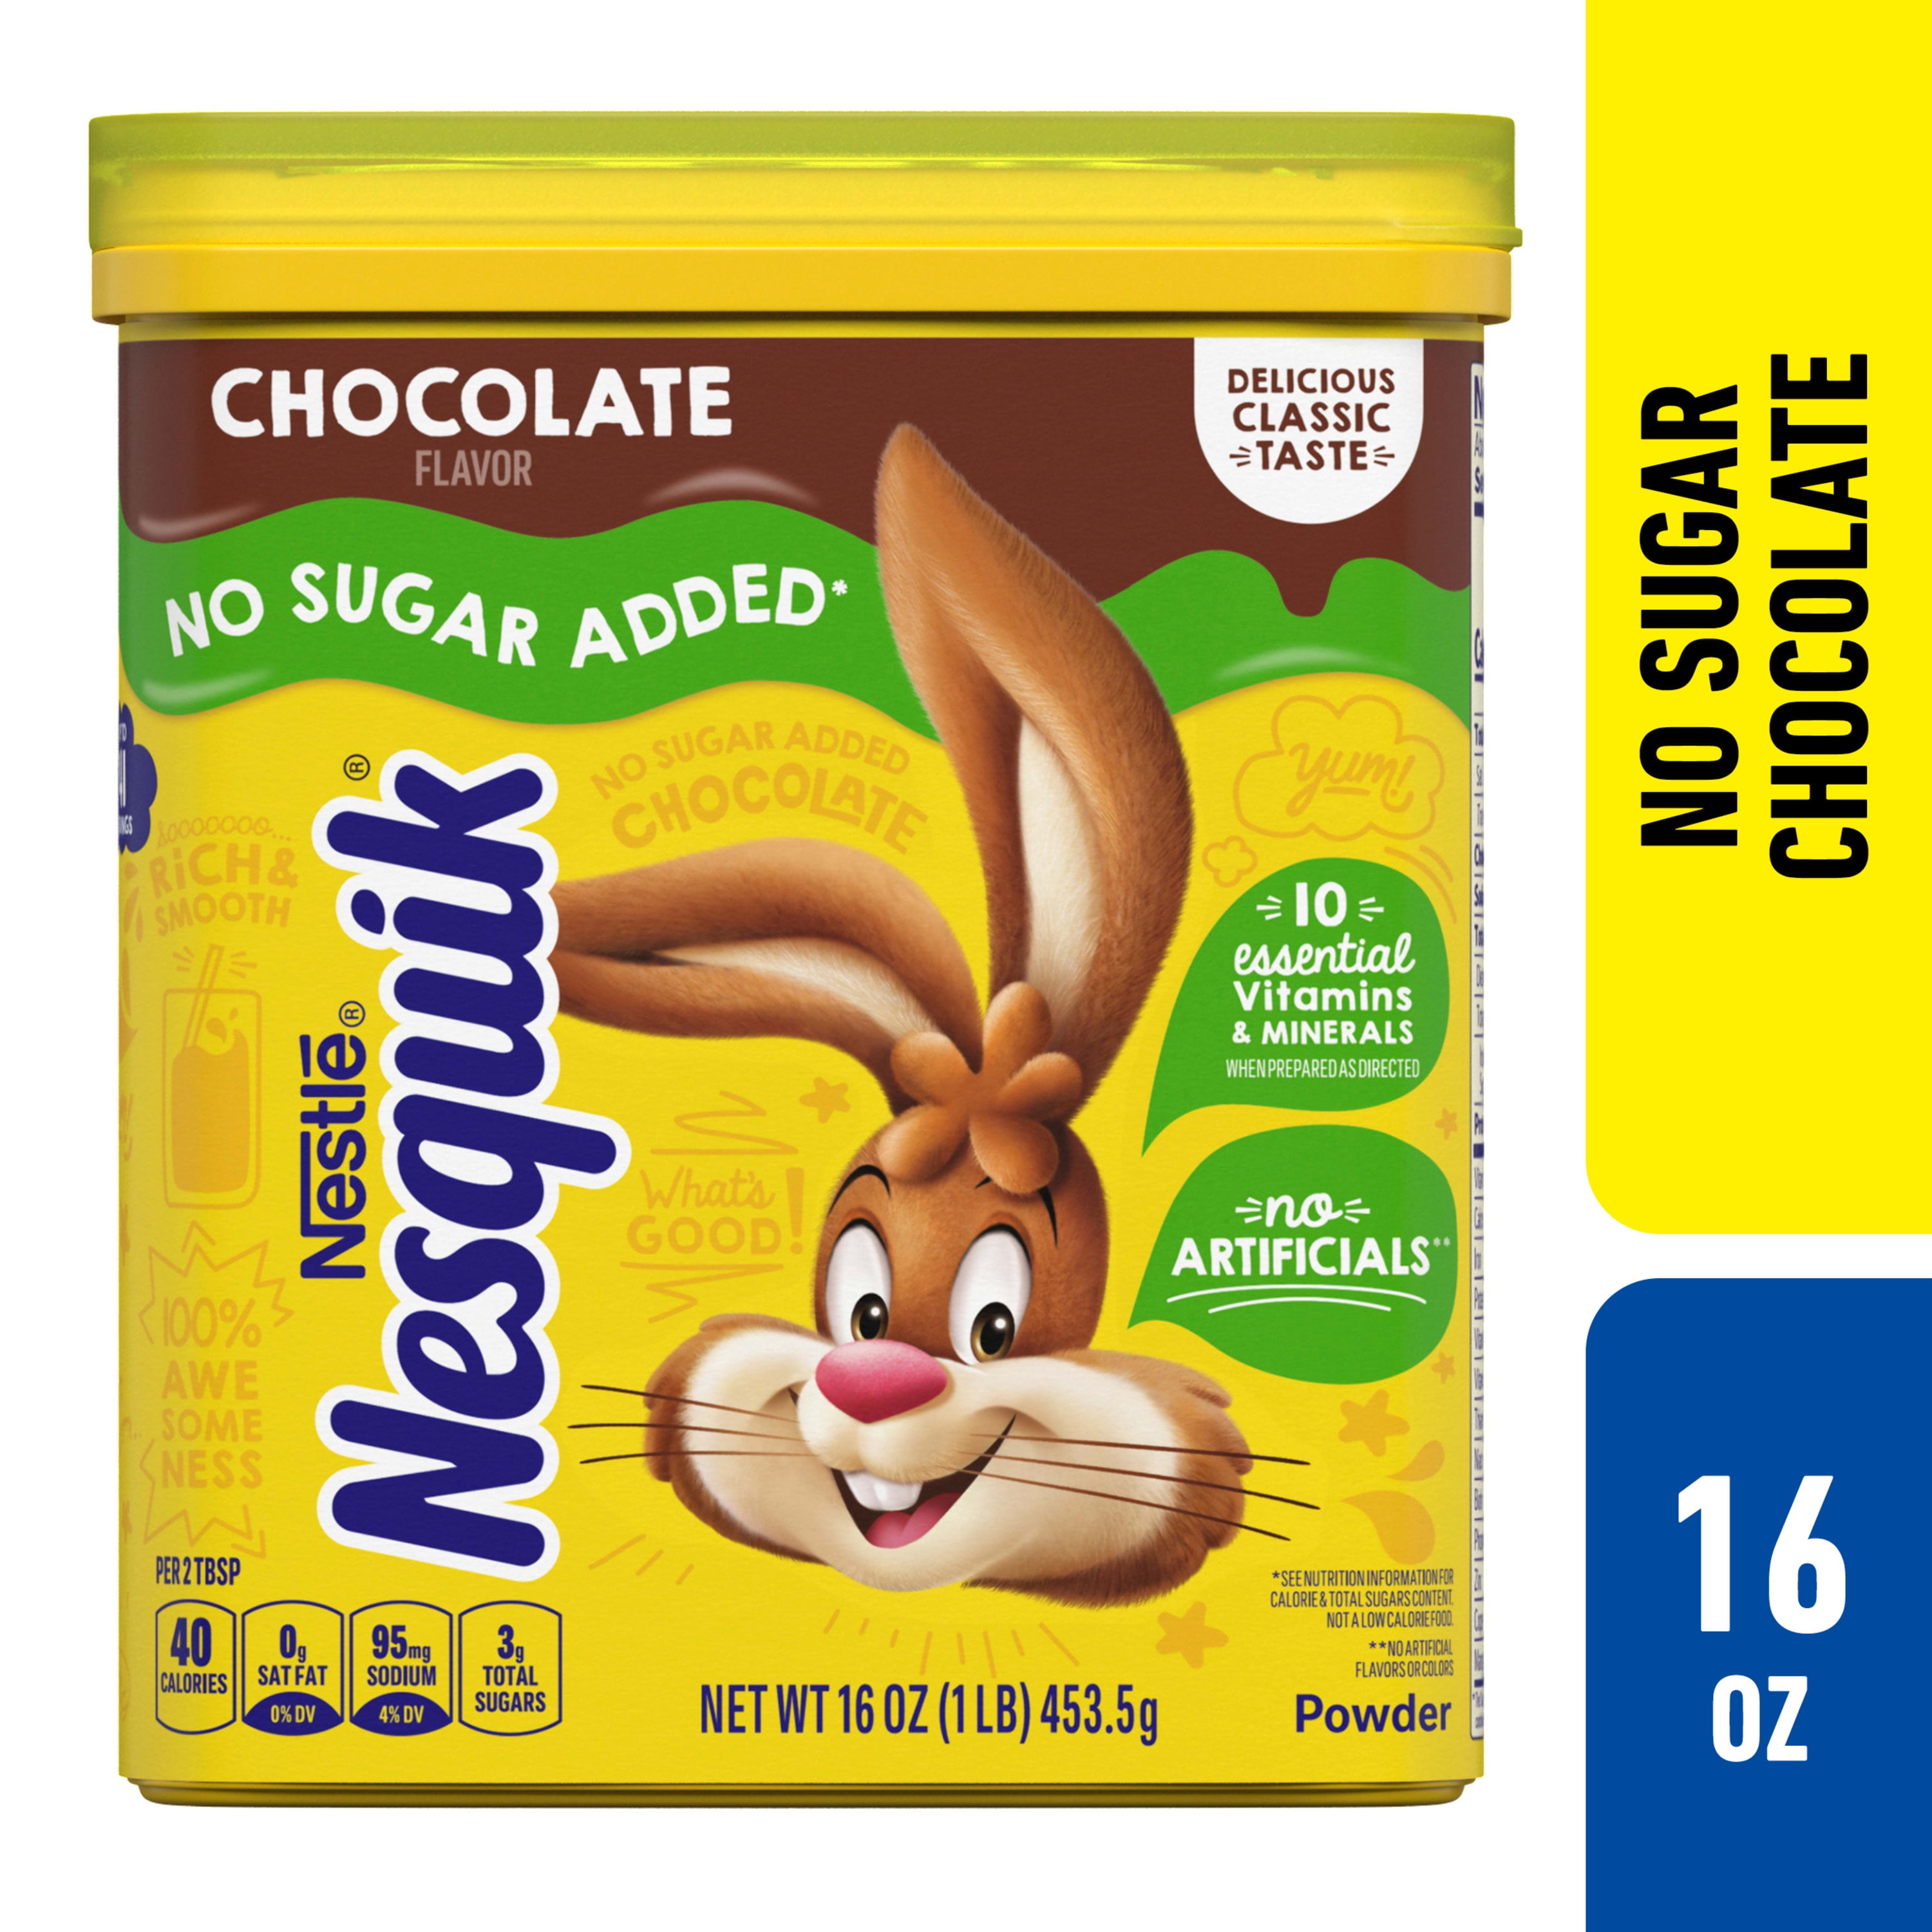 Nesquik to be discontinued in SA owing to 'lower demand